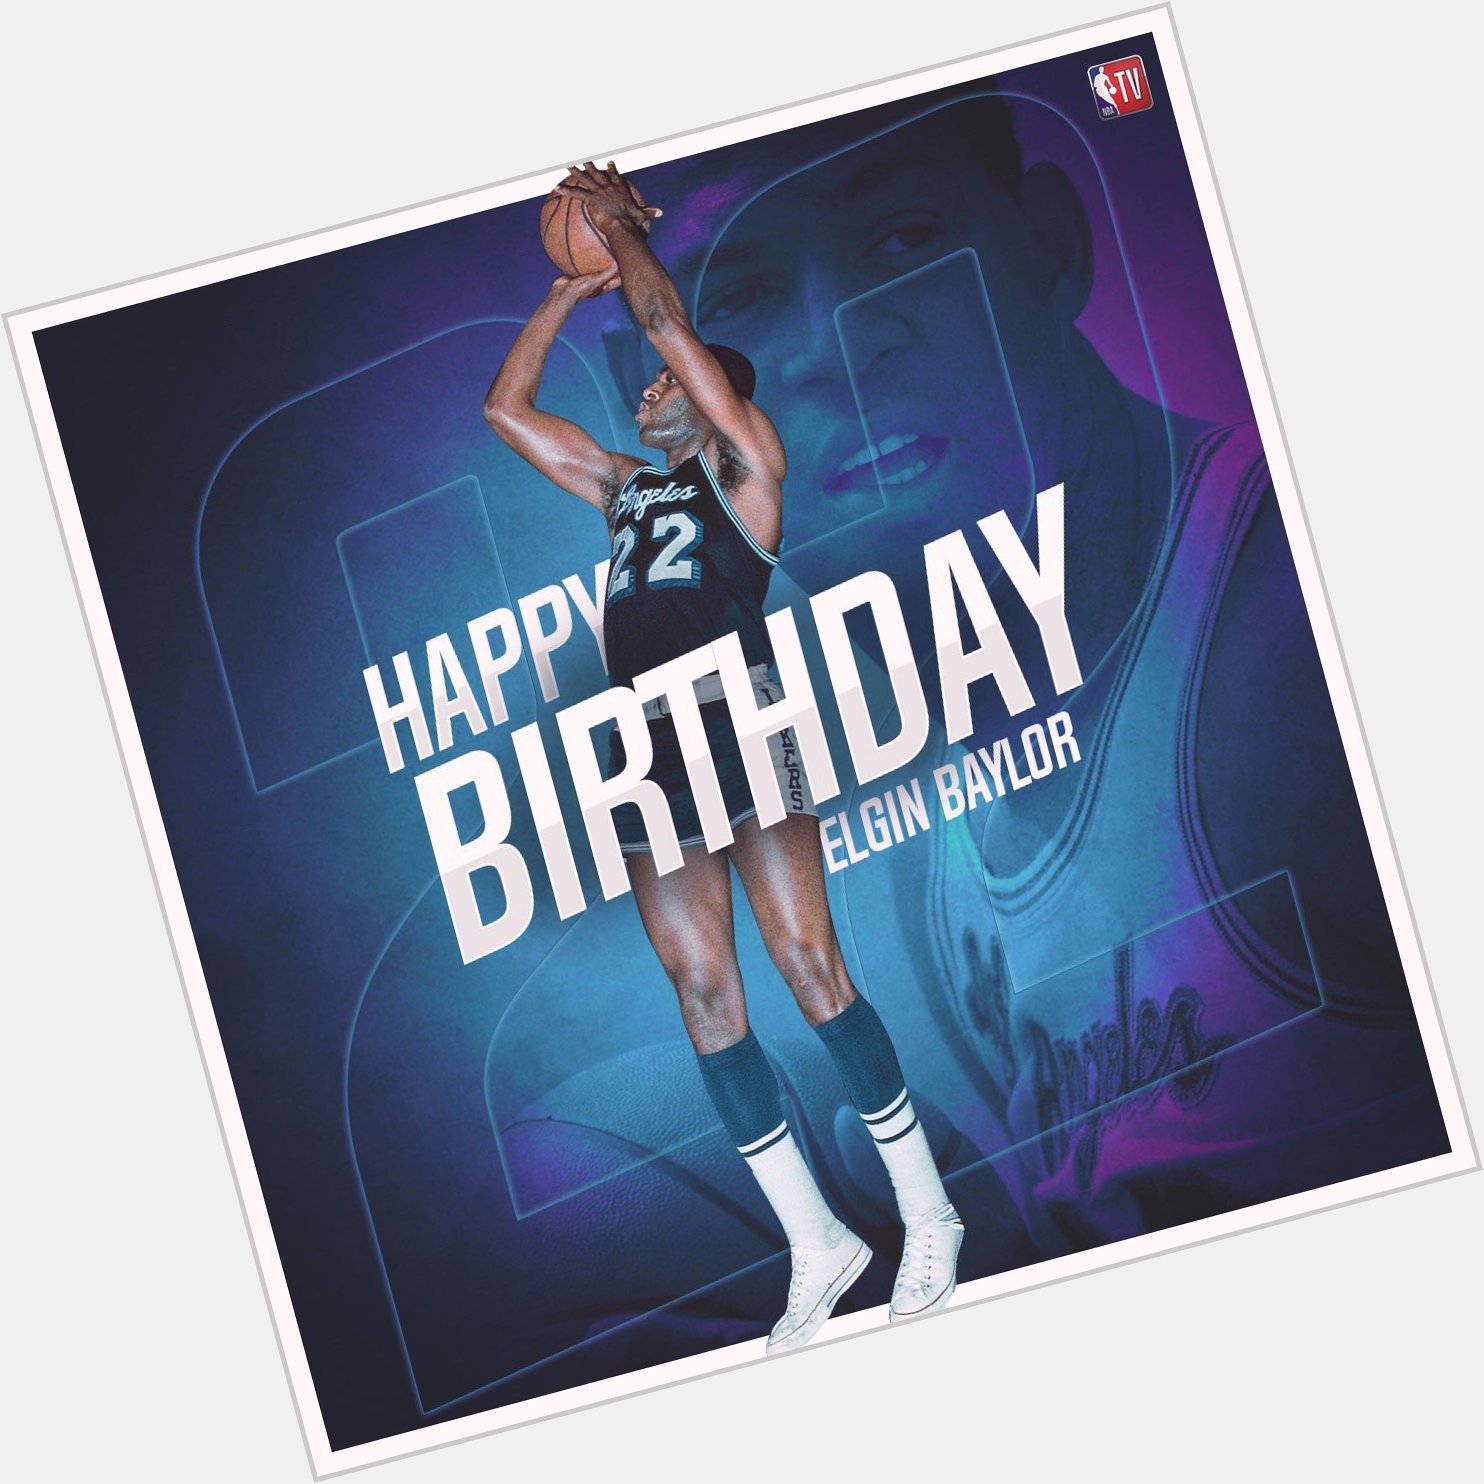 Join us in wishing Hall of Famer and legend, Elgin Baylor, a Happy Birthday! 